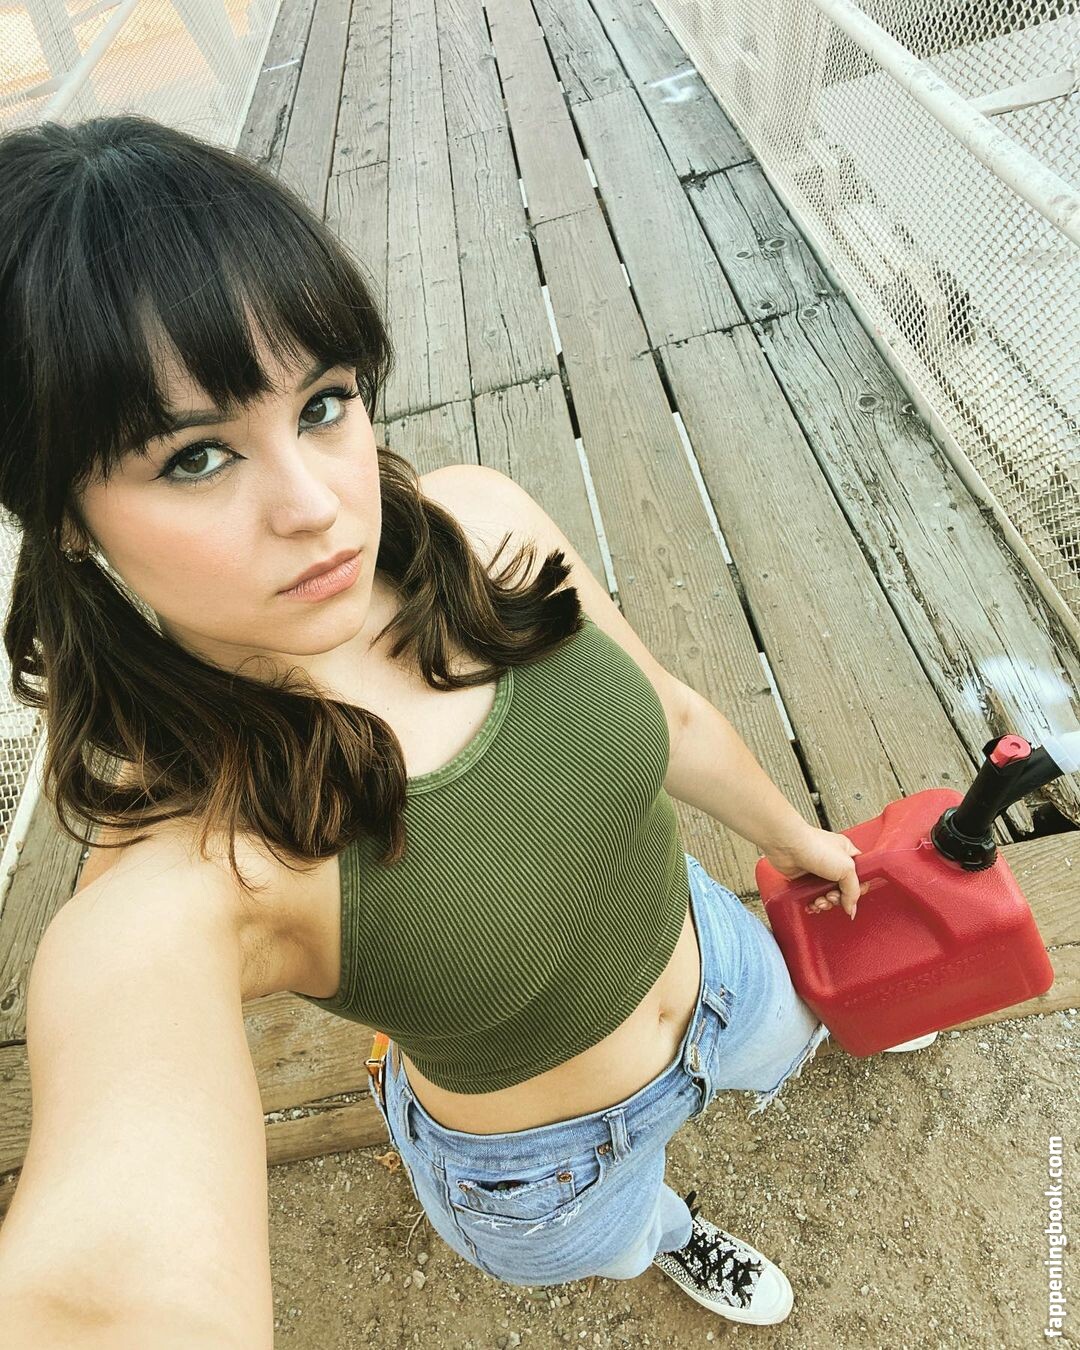 Hayley Orrantia Nude The Fappening Photo Fappeningbook